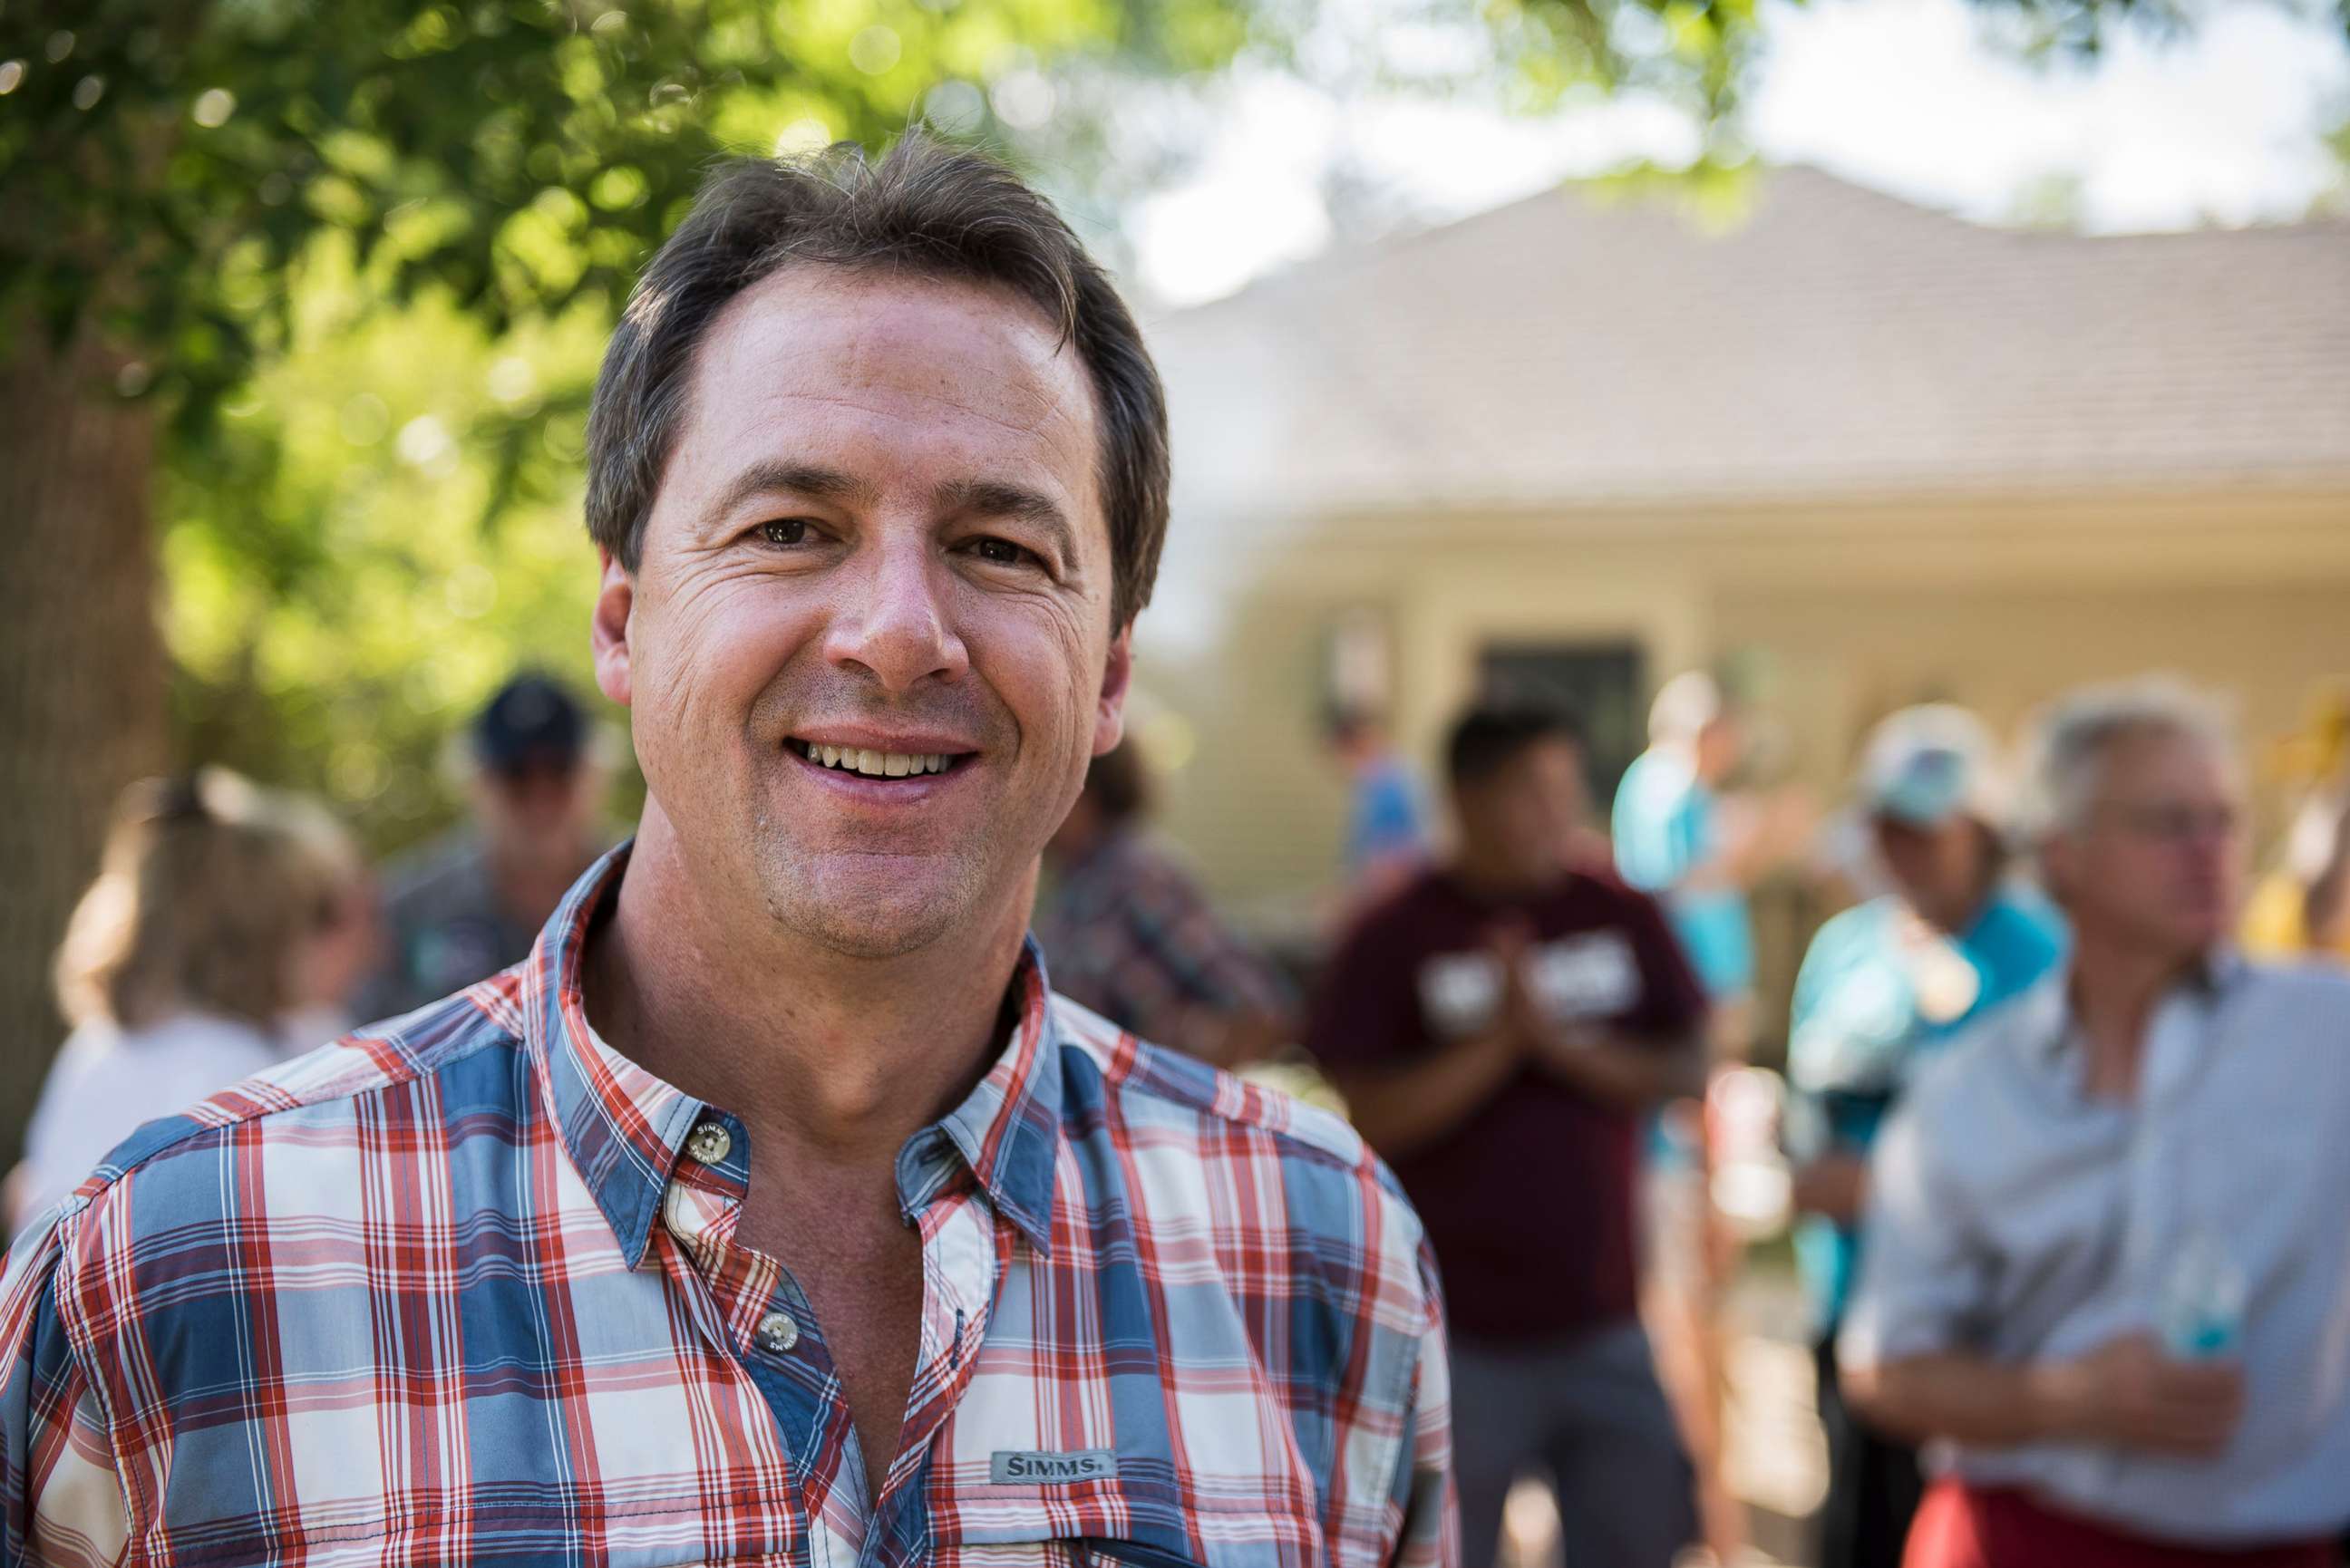 PHOTO: Montana Governor Steve Bullock campaigning at a democrats gathering in Livingston, Montana on July 2, 2016.